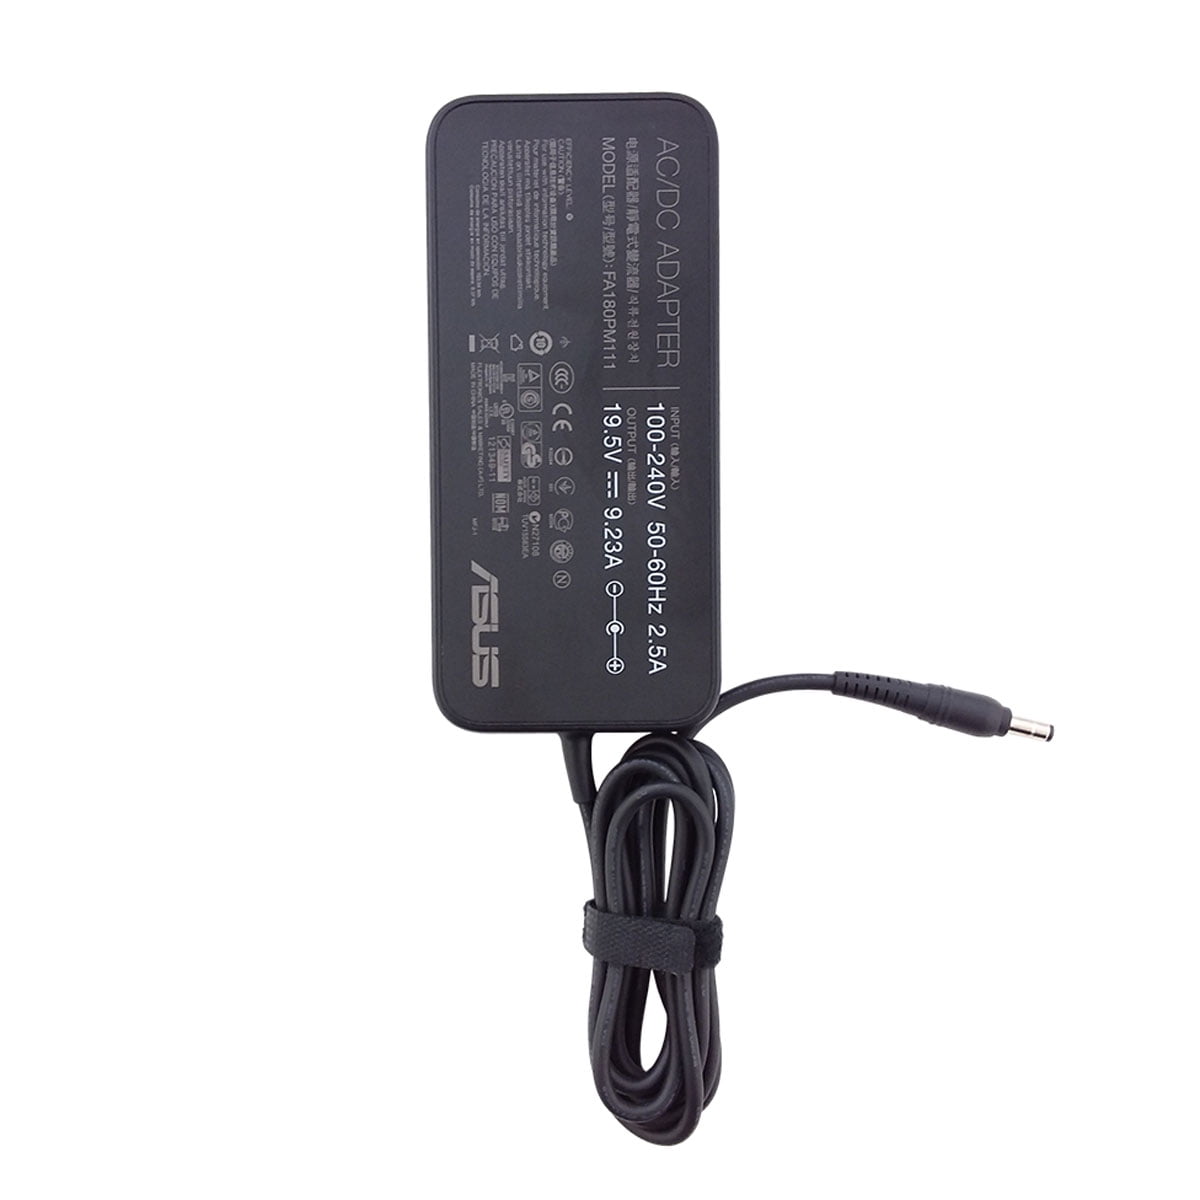 Asus G75VX-DS72-NB laptop PC computer power supply ac adapter cord cable charger 